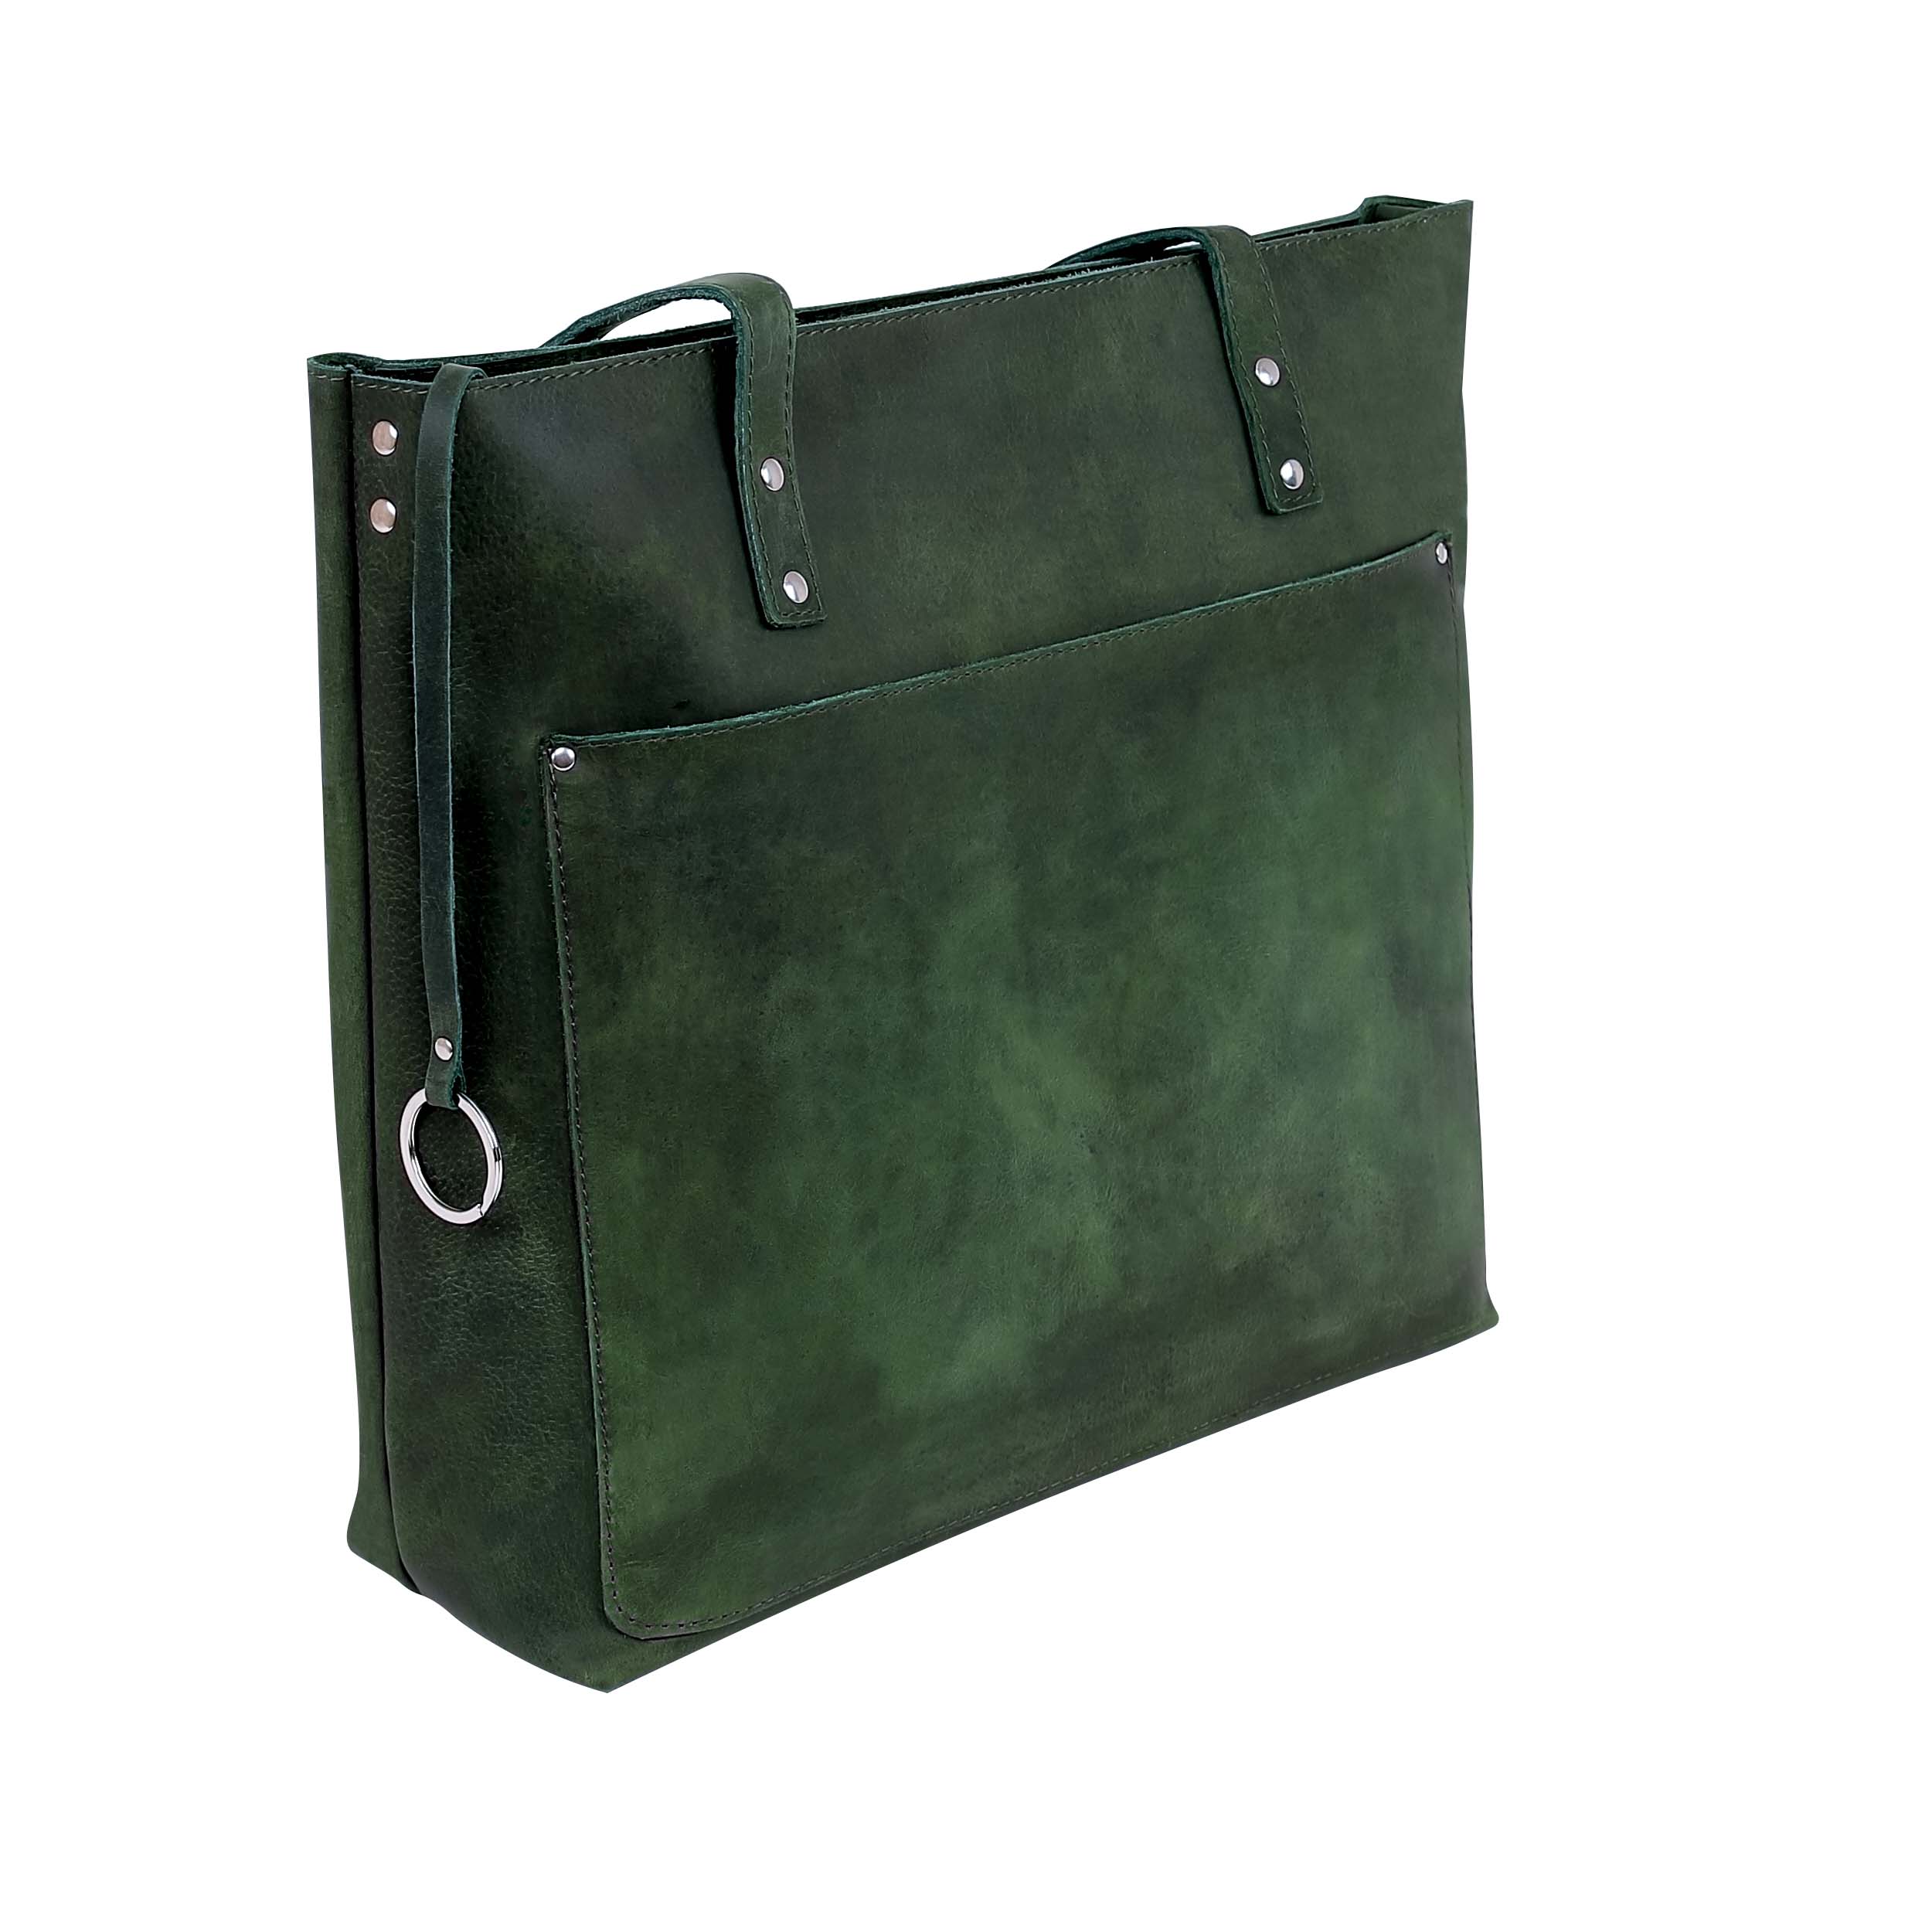 Leather Tote Bag 9916 - Green